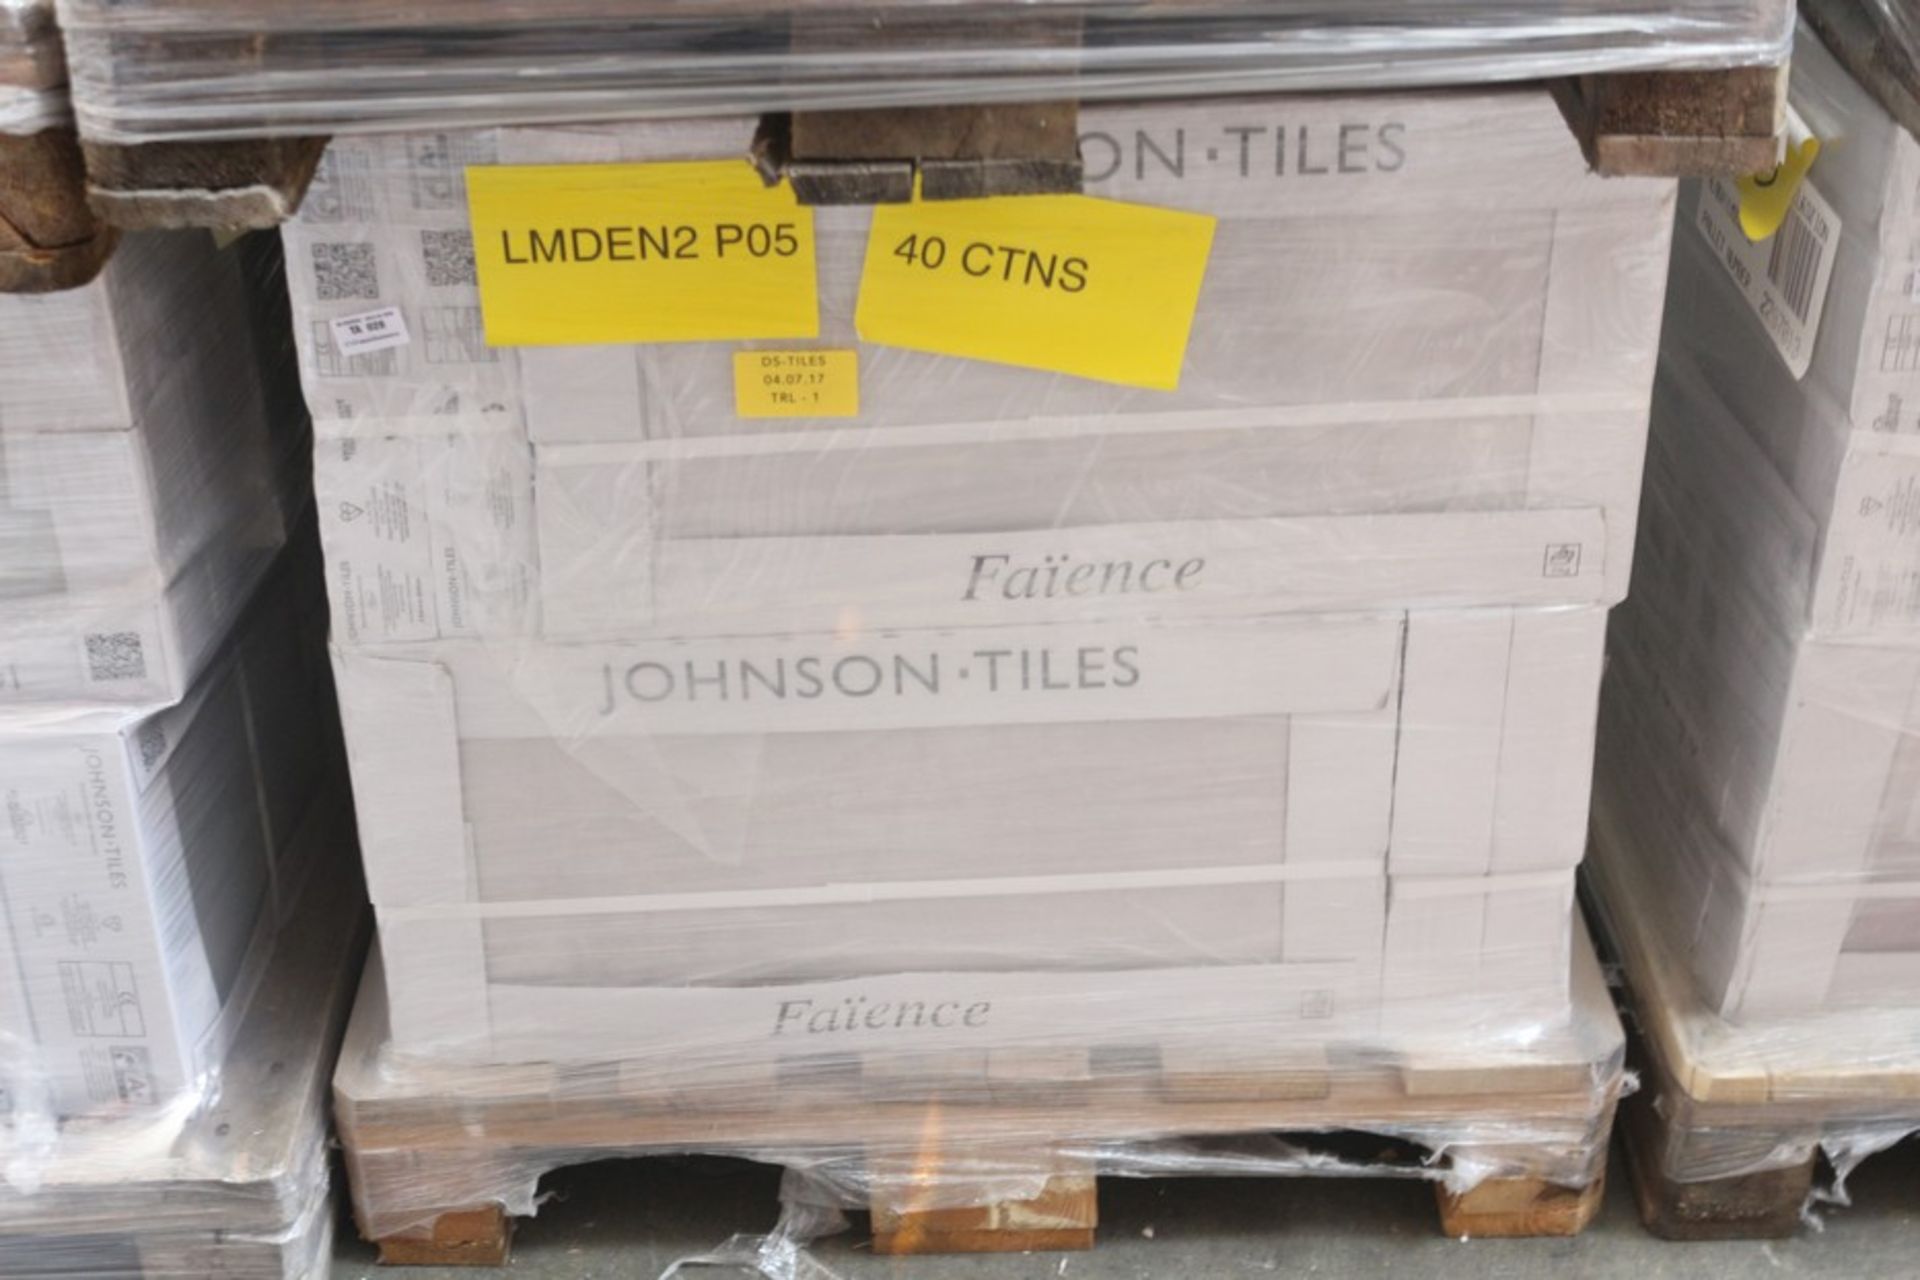 40X FACTORY SEALED BY JOHNSON TILES GLAZED WALL TILES 600 X 300MM 5 PER PACK RRP £19.99 COMBINED RRP